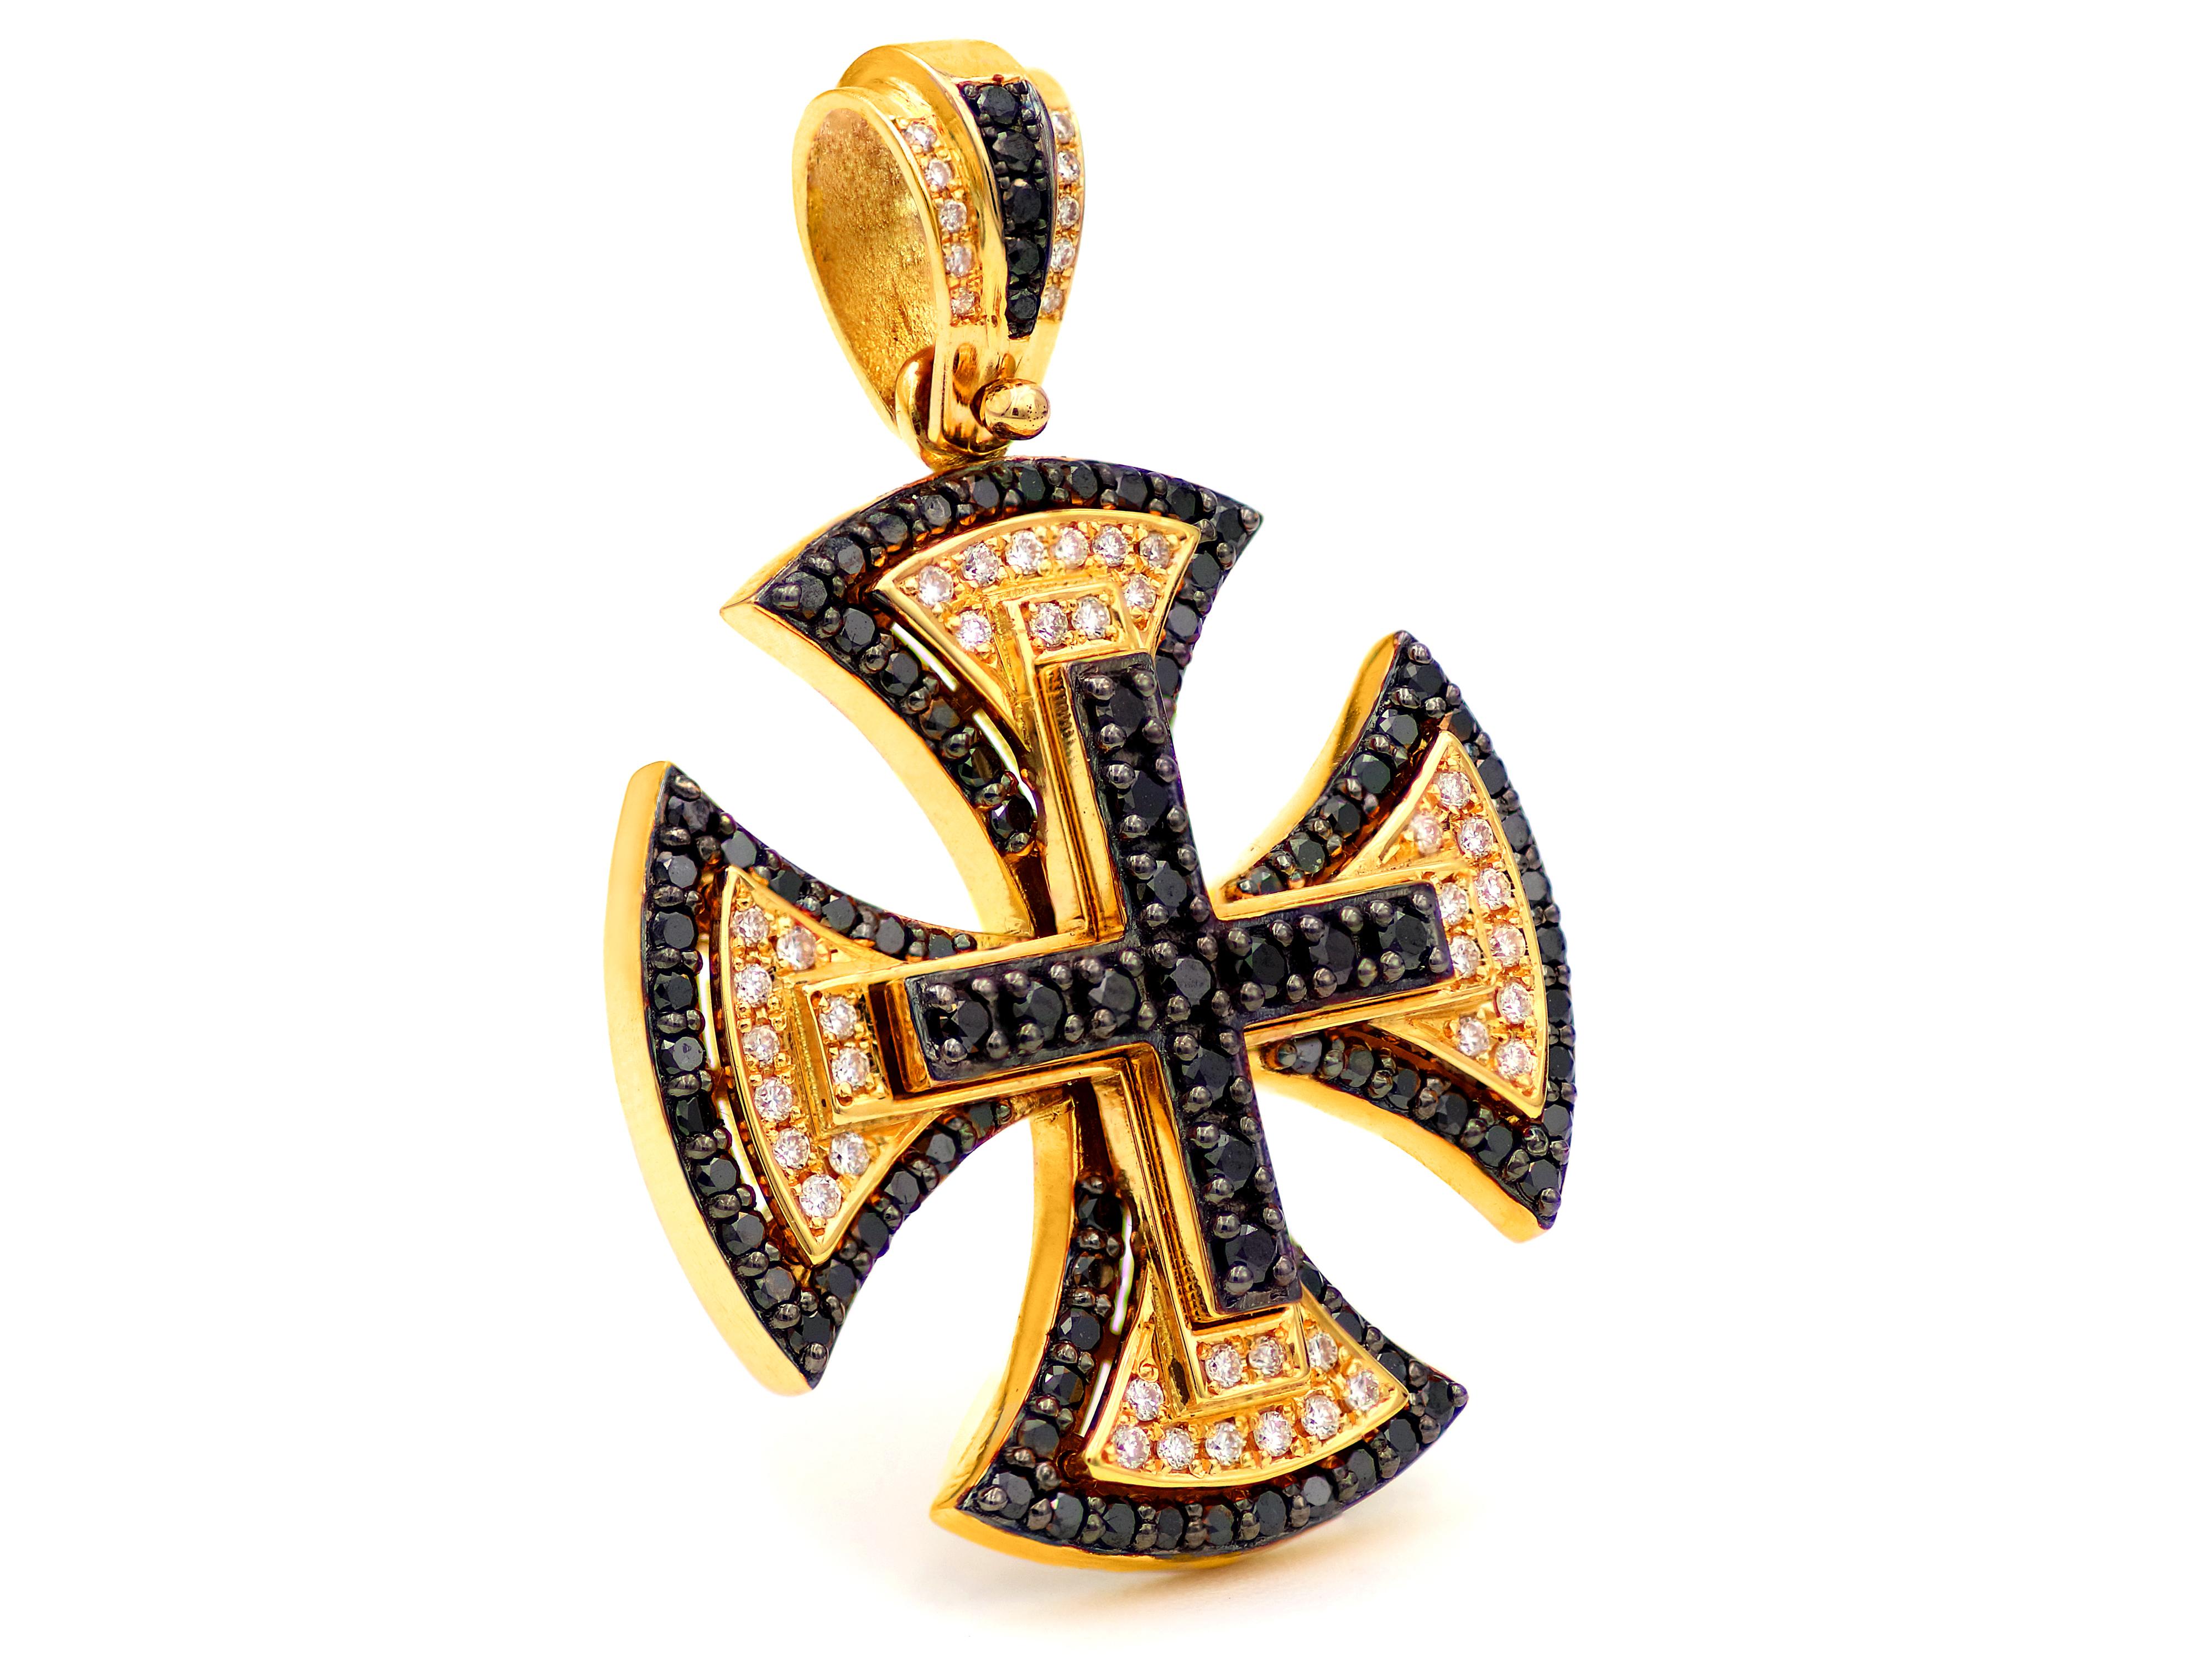 A medieval cross hosts the todays cross of Christianity. A united symbol that brings out 2 worlds with the outer and inner center cross.  Set in 18 karats yellow gold with 1.20 karats black and 0.28 karats white natural brilliant cut diamonds that